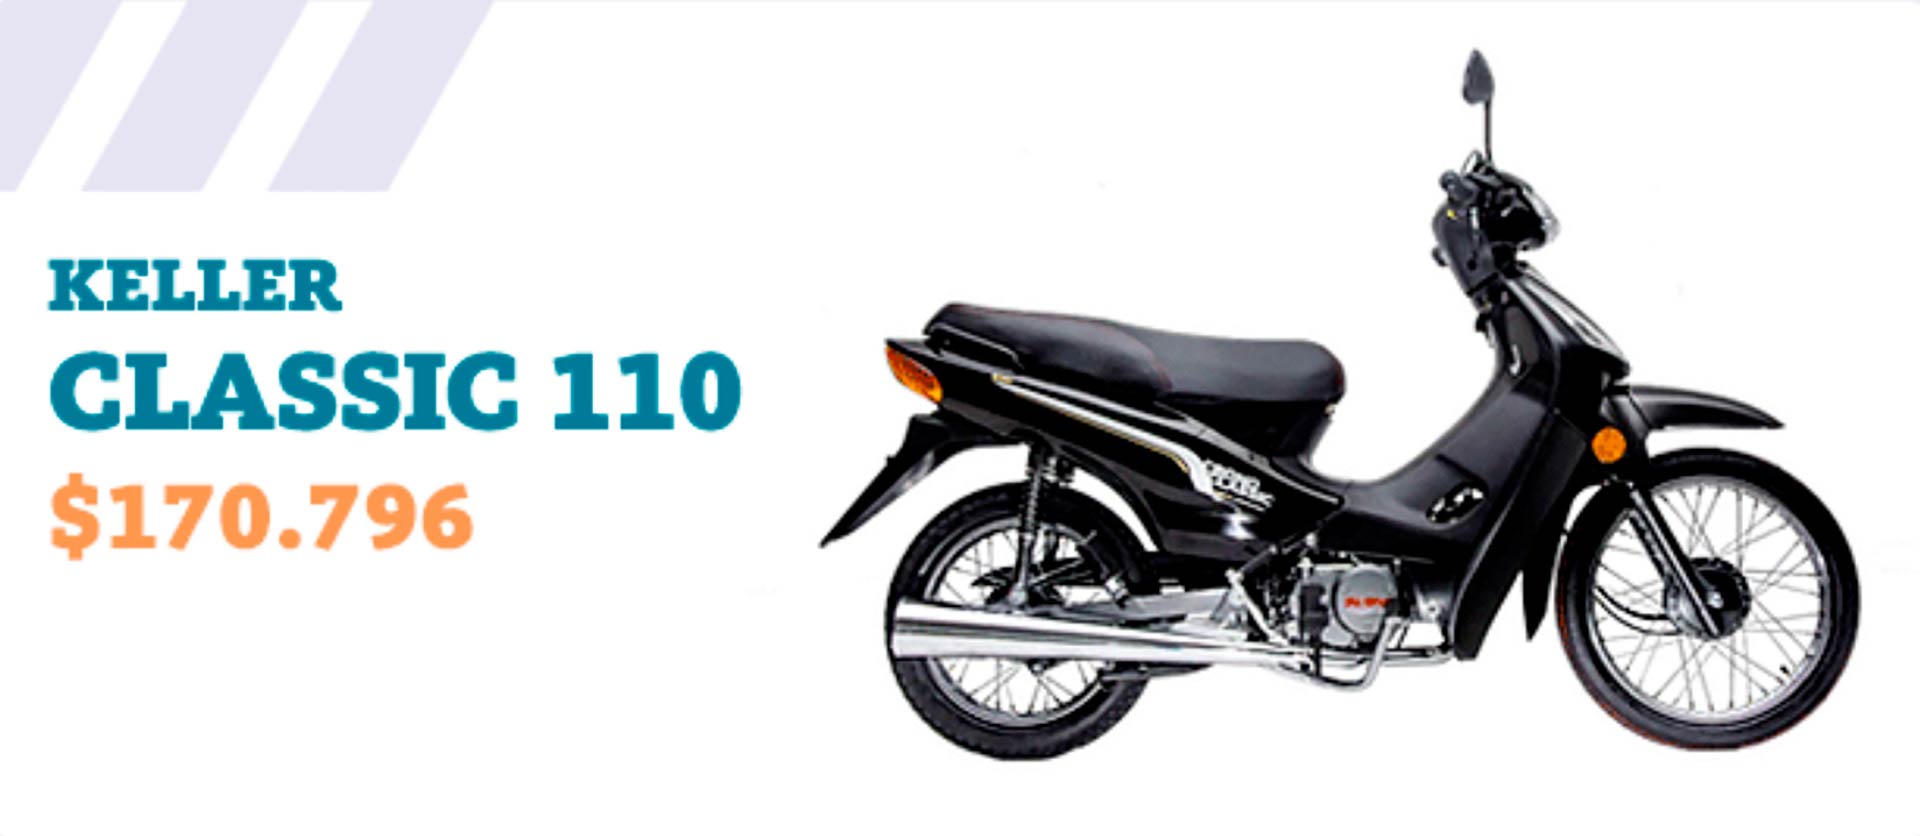 The cheapest motorcycle is at $170,796